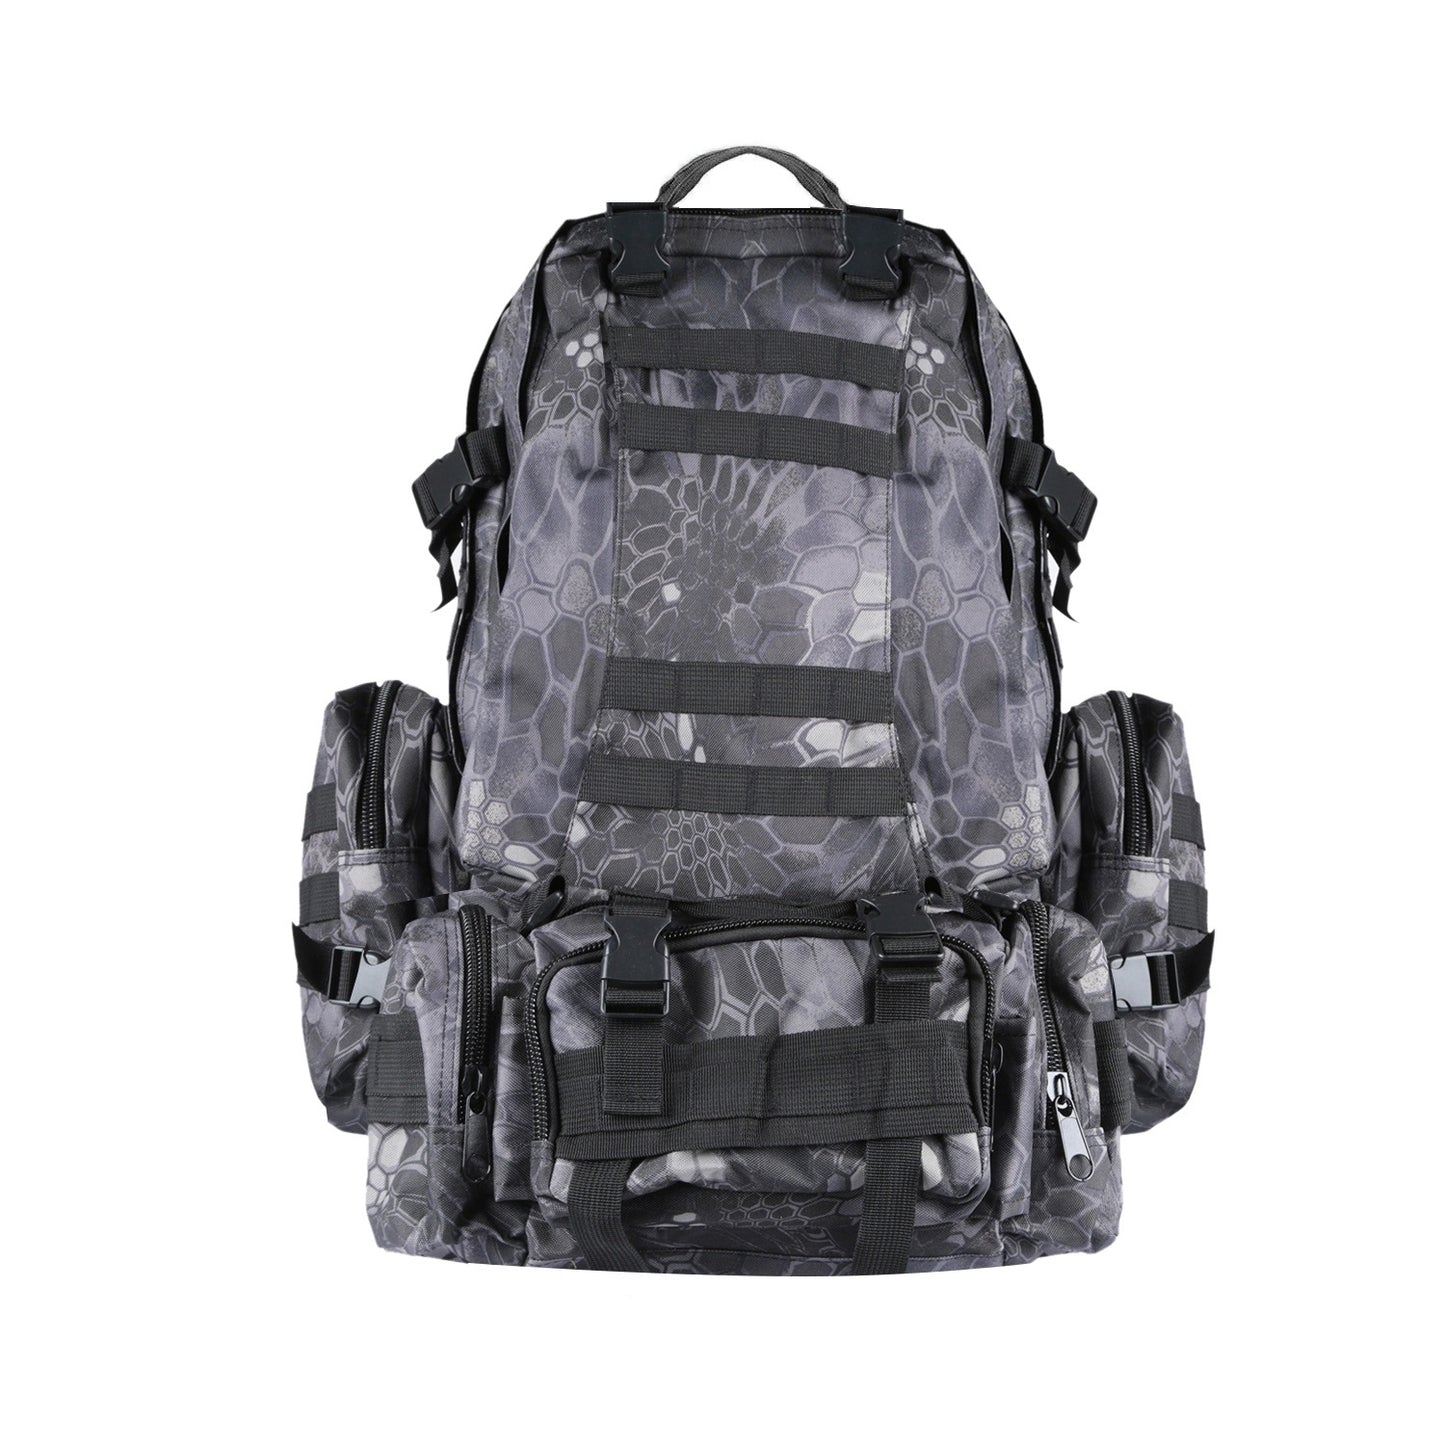 56L Military Tactical Backpack Rucksacks Army Assault Pack Combat Backpack Pouch